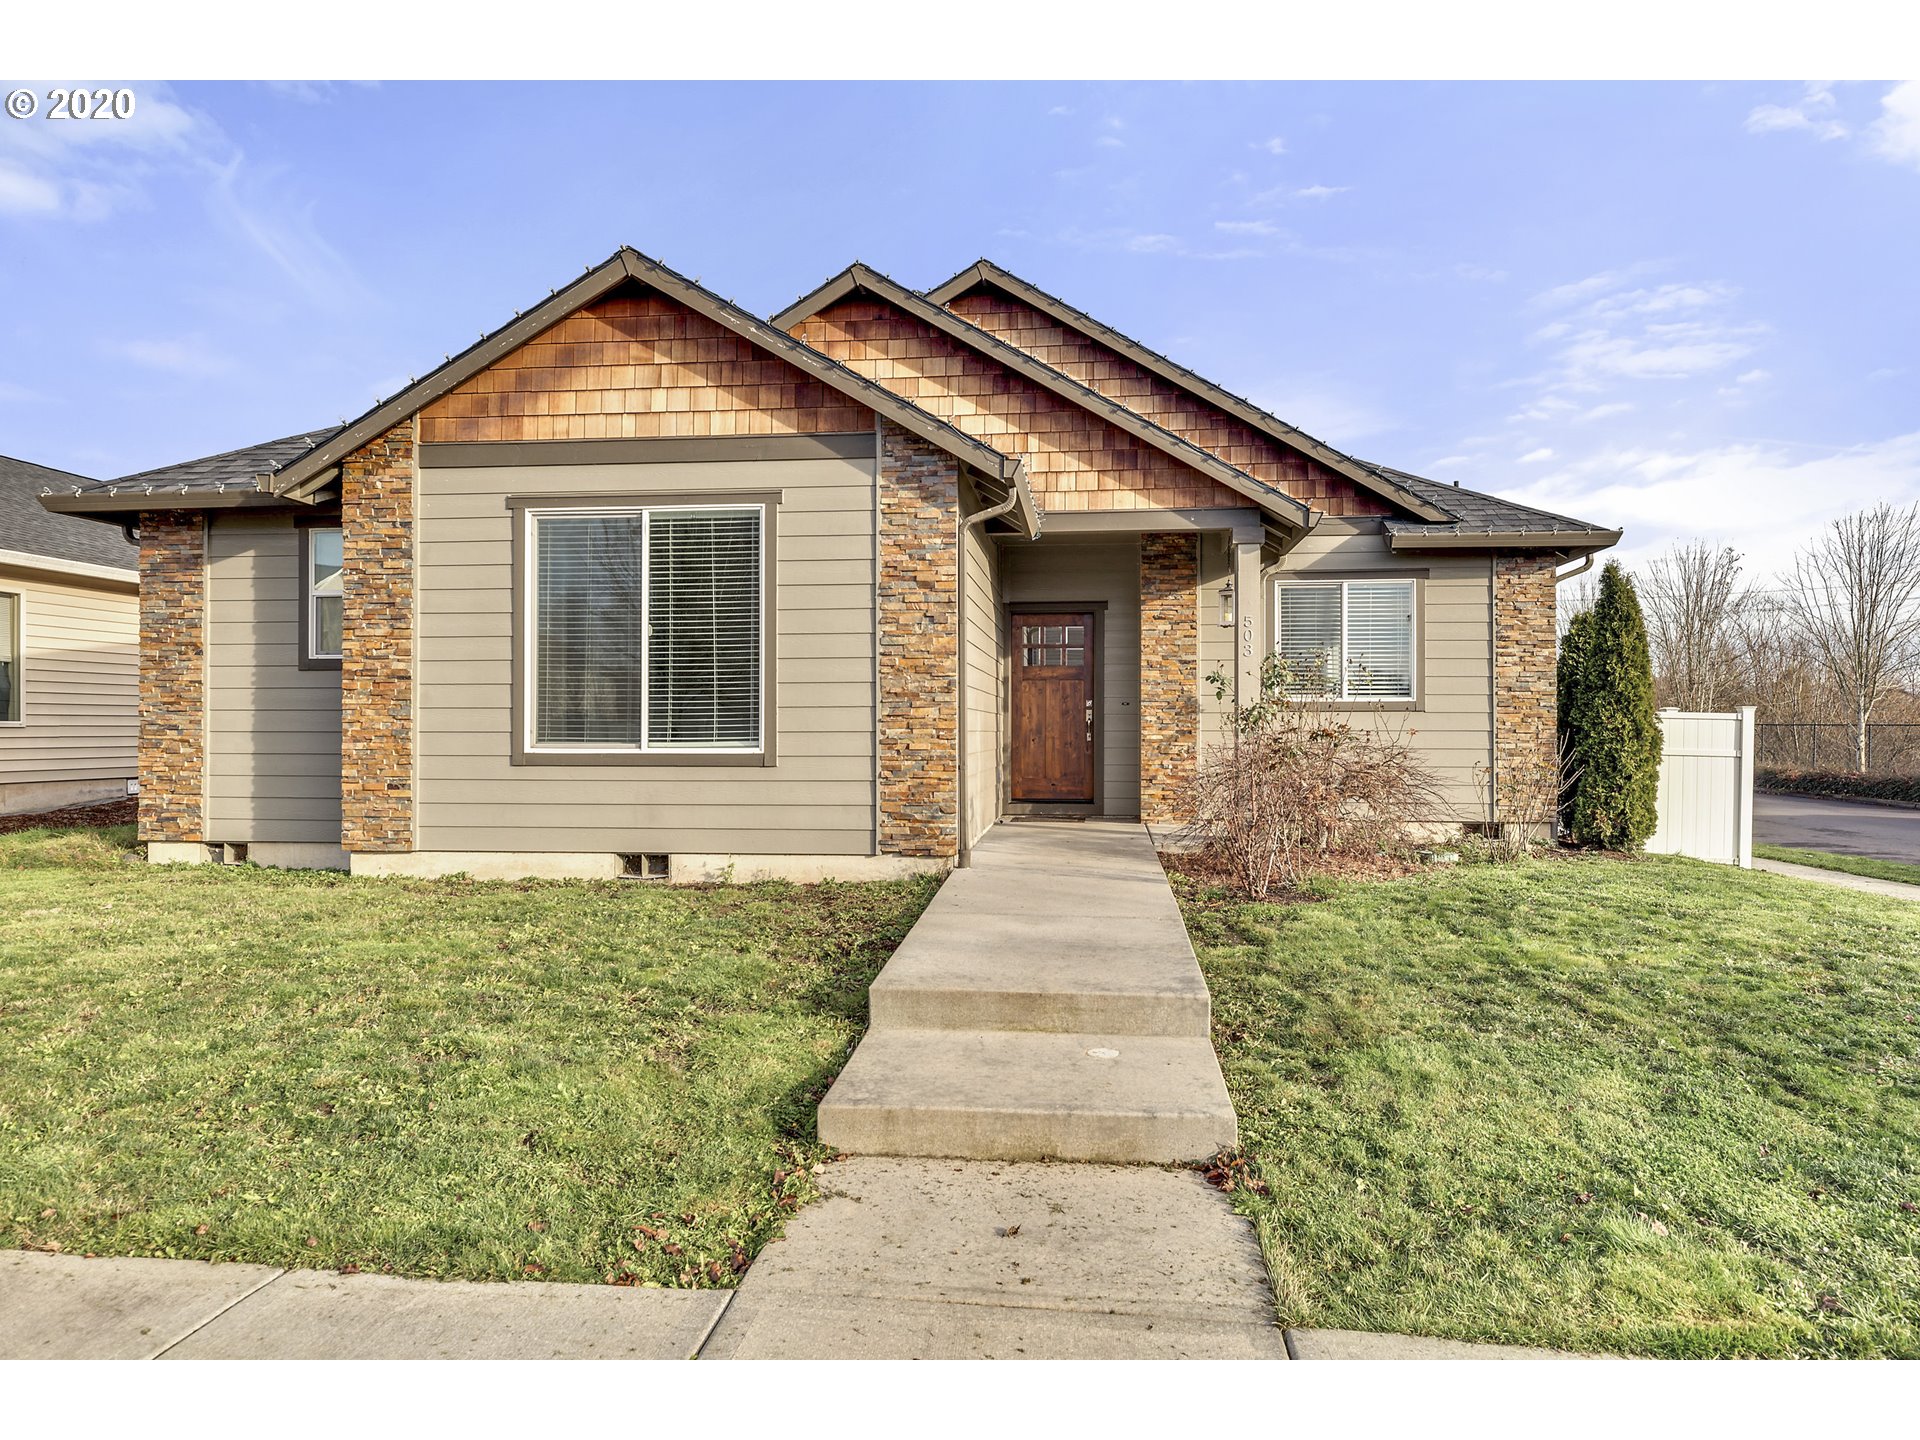 503 NW 21ST AVE (1 of 24)